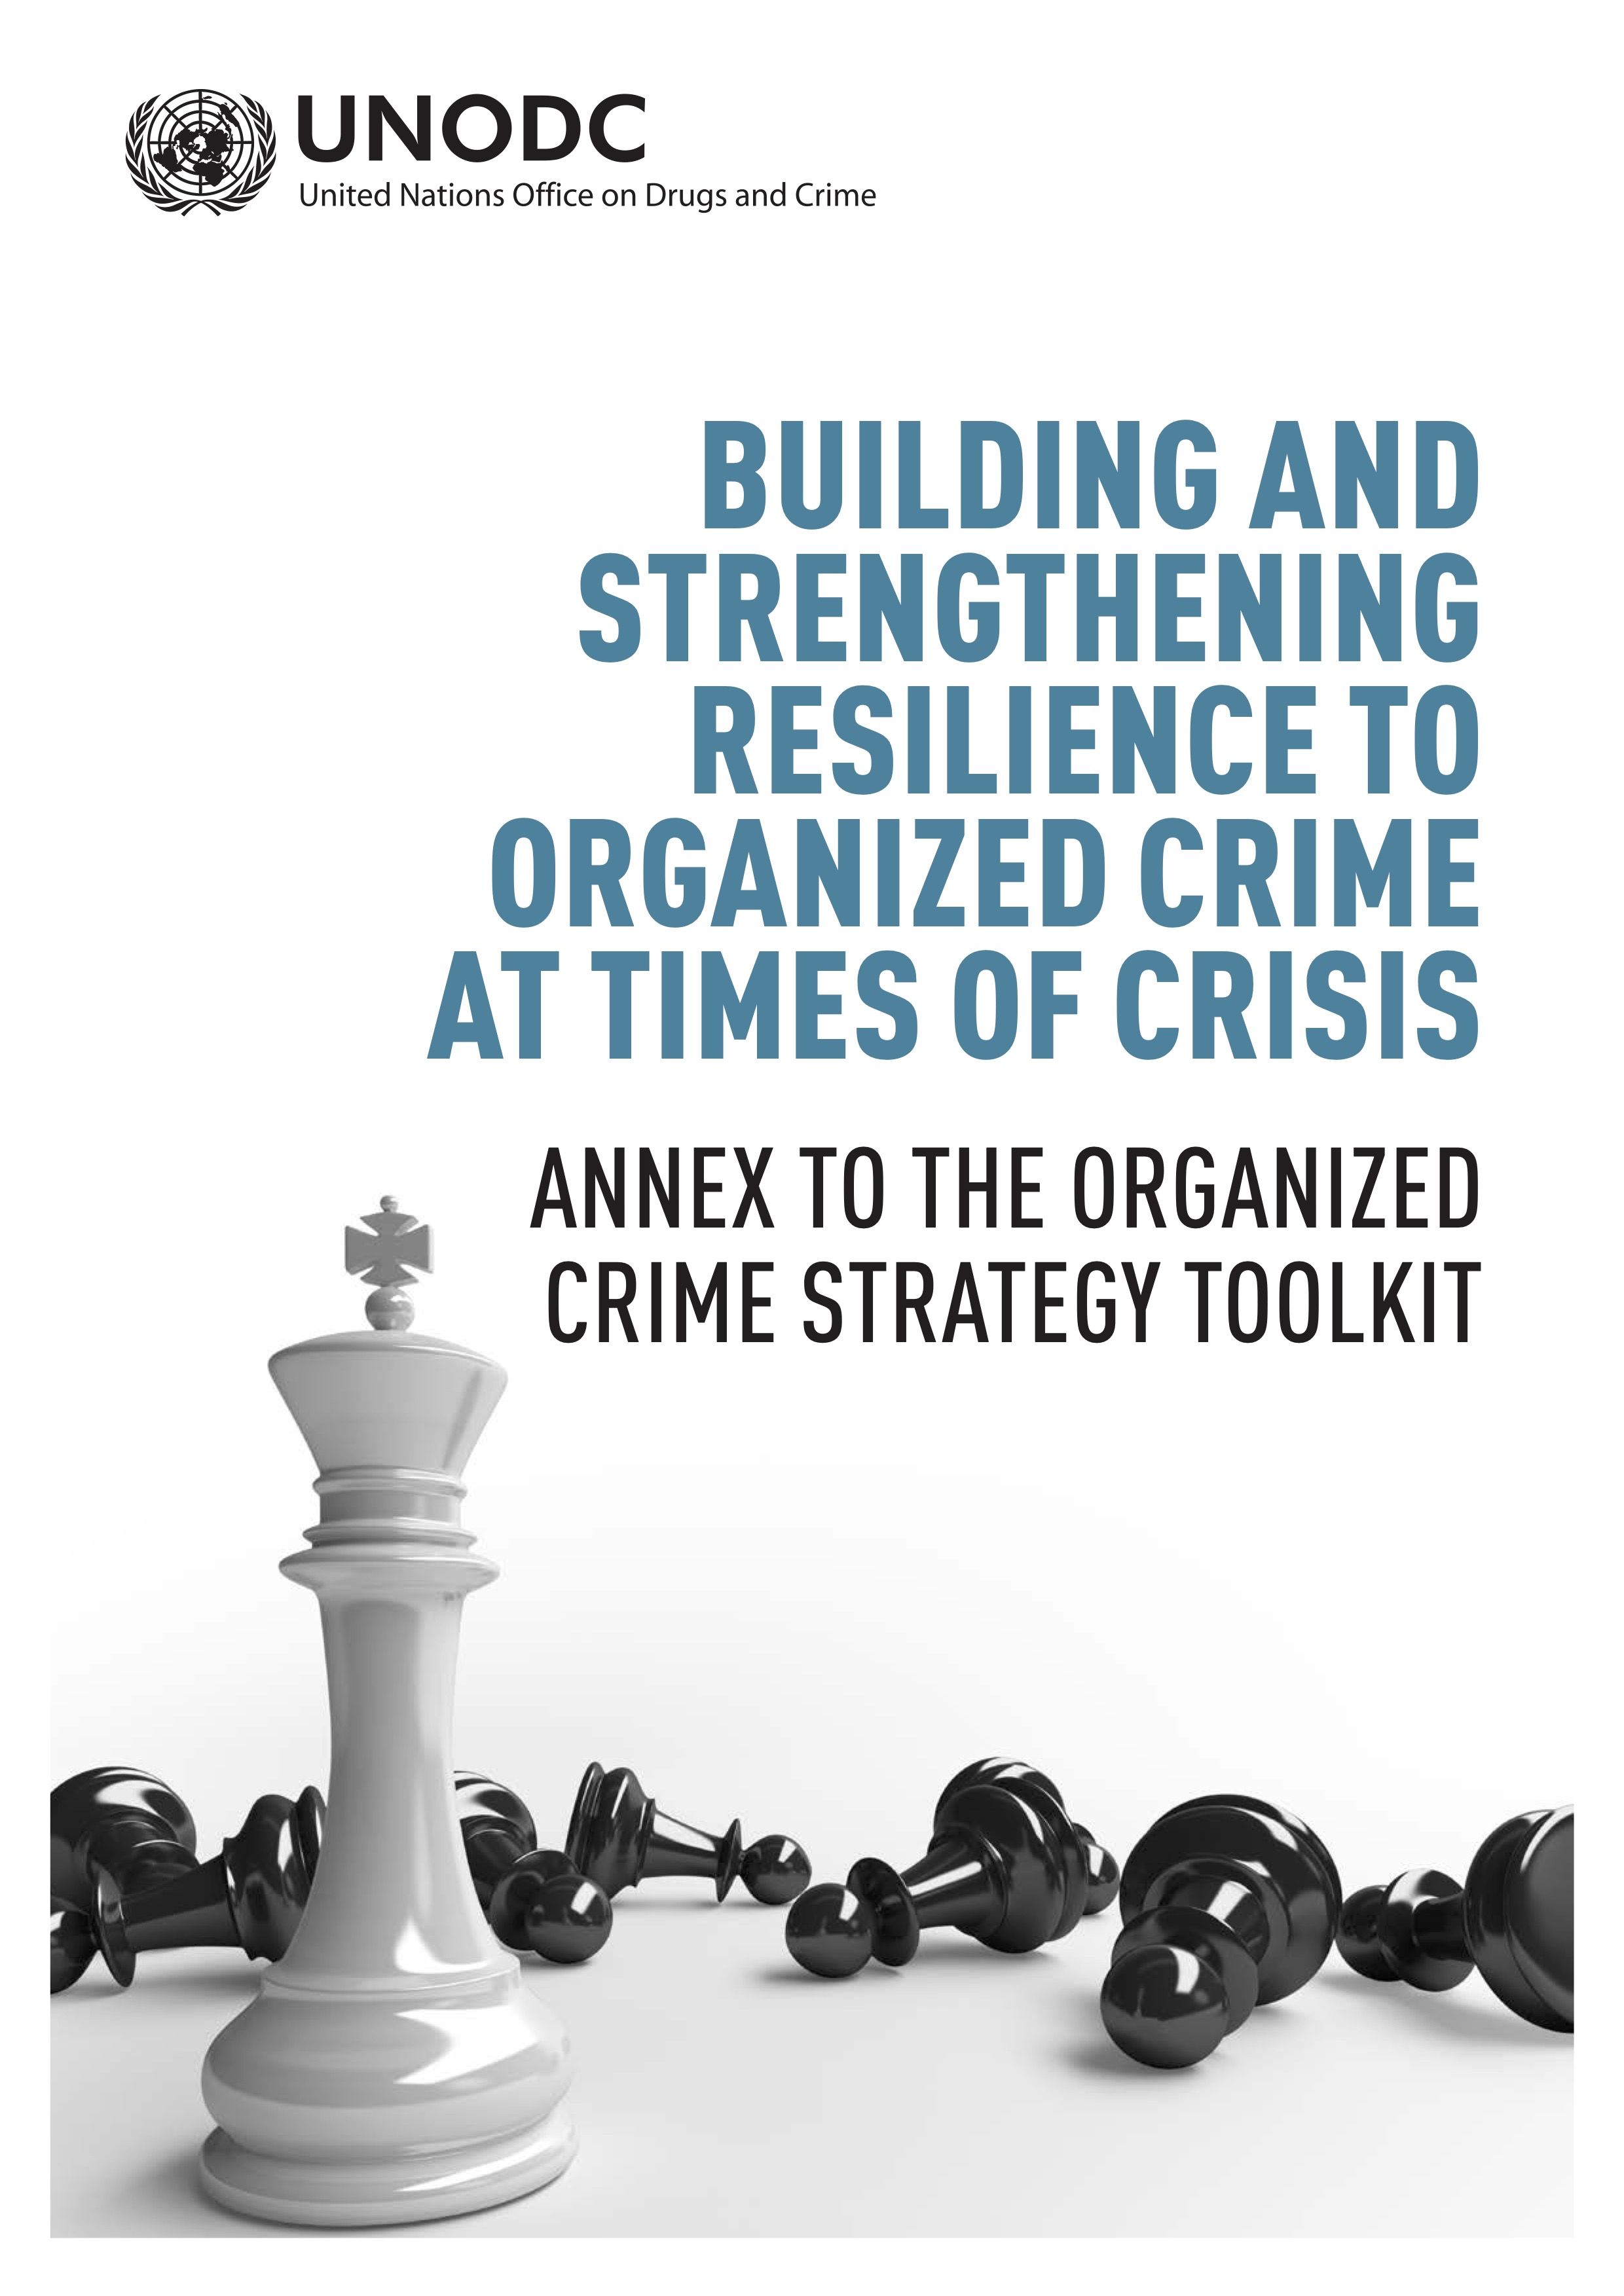 <div style="text-align: center;"> </div>
<div style="text-align: center;">Building and Strengthening Resilience to Organized Crime at Time of Crisis - Annex to the Organized Crime Strategy Toolkit</div>
<div style="text-align: center;">(<a href="/cld/uploads/pdf/Strategies/Building_and_Strengthening_Resilience_to_Organized_Crime_at_Times_of_Crisis_Annex_Arabic.pdf">A</a> - <a href="/cld/uploads/pdf/Crisis_Resilience_Annex_Chinese.pdf">C</a> - <a href="https://sherloc.unodc.org/cld/uploads/pdf/Building_and_Strengthening_Resilience_to_Organized_Crime_at_Times_of_Crisis_Annex.pdf">E</a> - <a href="/cld/uploads/pdf/Strategies/Building_and_Strengthening_Resilience_to_Organized_Crime_at_Times_of_Crisis_Annex_Francais.pdf">F</a> - <a href="https://sherloc.unodc.org/cld/uploads/pdf/Strategies/Building_and_Strengthening_Resilience_to_Organized_Crime_at_Times_of_Crisis_Annex_Russian.pdf">R</a> - <a href="/cld/uploads/pdf/Strategies/building_and_Strengthening_Resilience_to_Organized_Crime_at_Times_of_Crisis_Annex_Spanish.pdf">S</a>)</div>